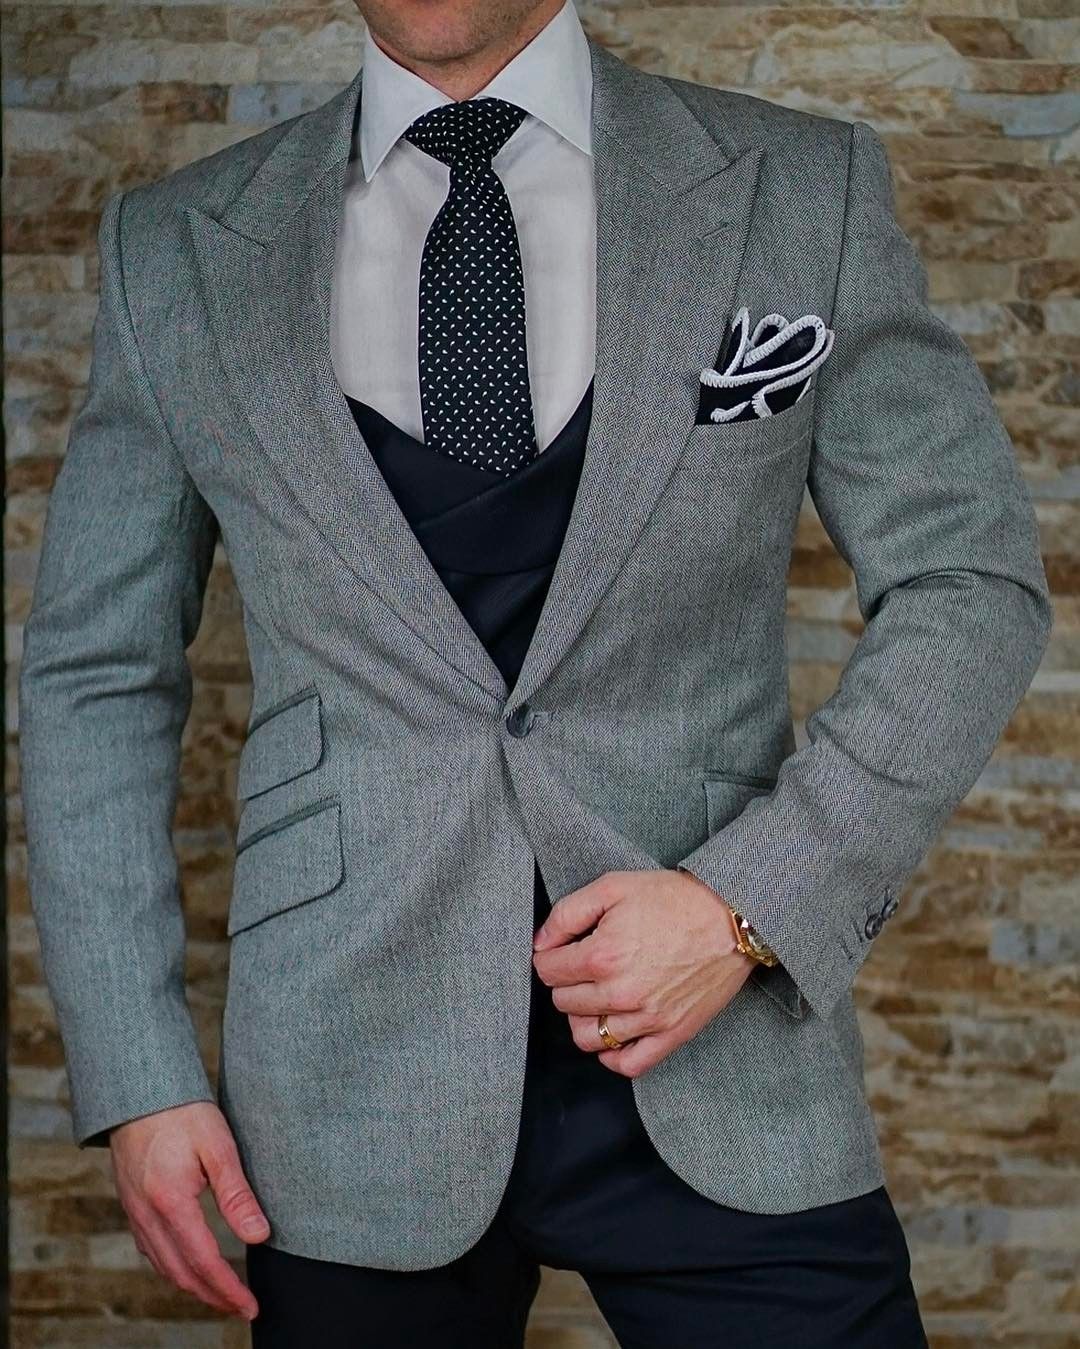 40 Ways to Accessorize the Suit with a Handkerchief - Elegance & Class